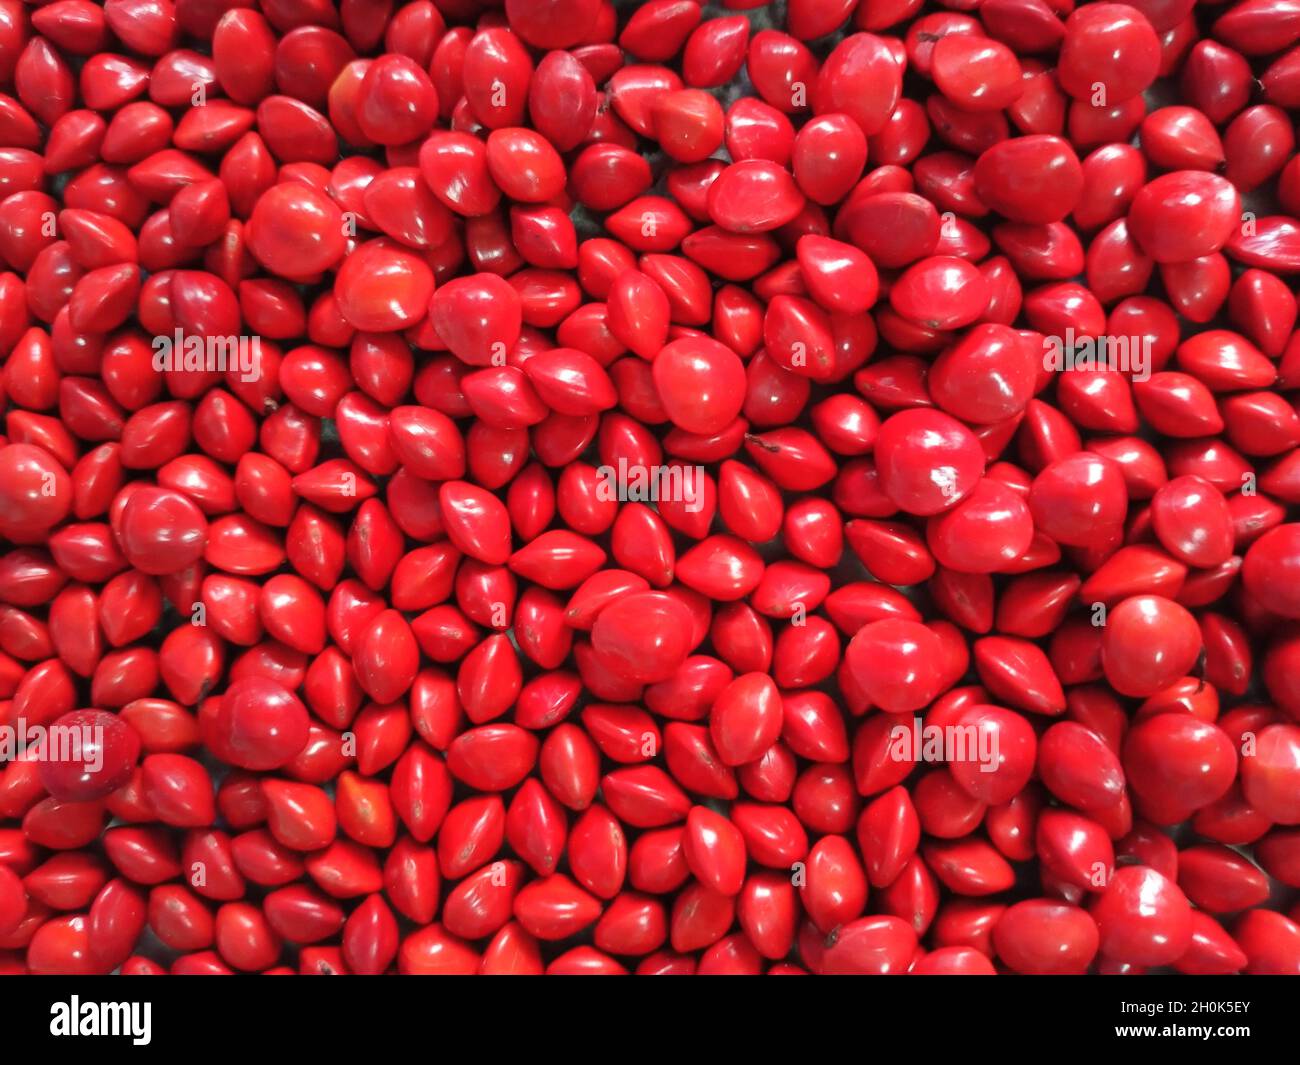 Saga Seed Acacia beans red in colour background Stock Photo